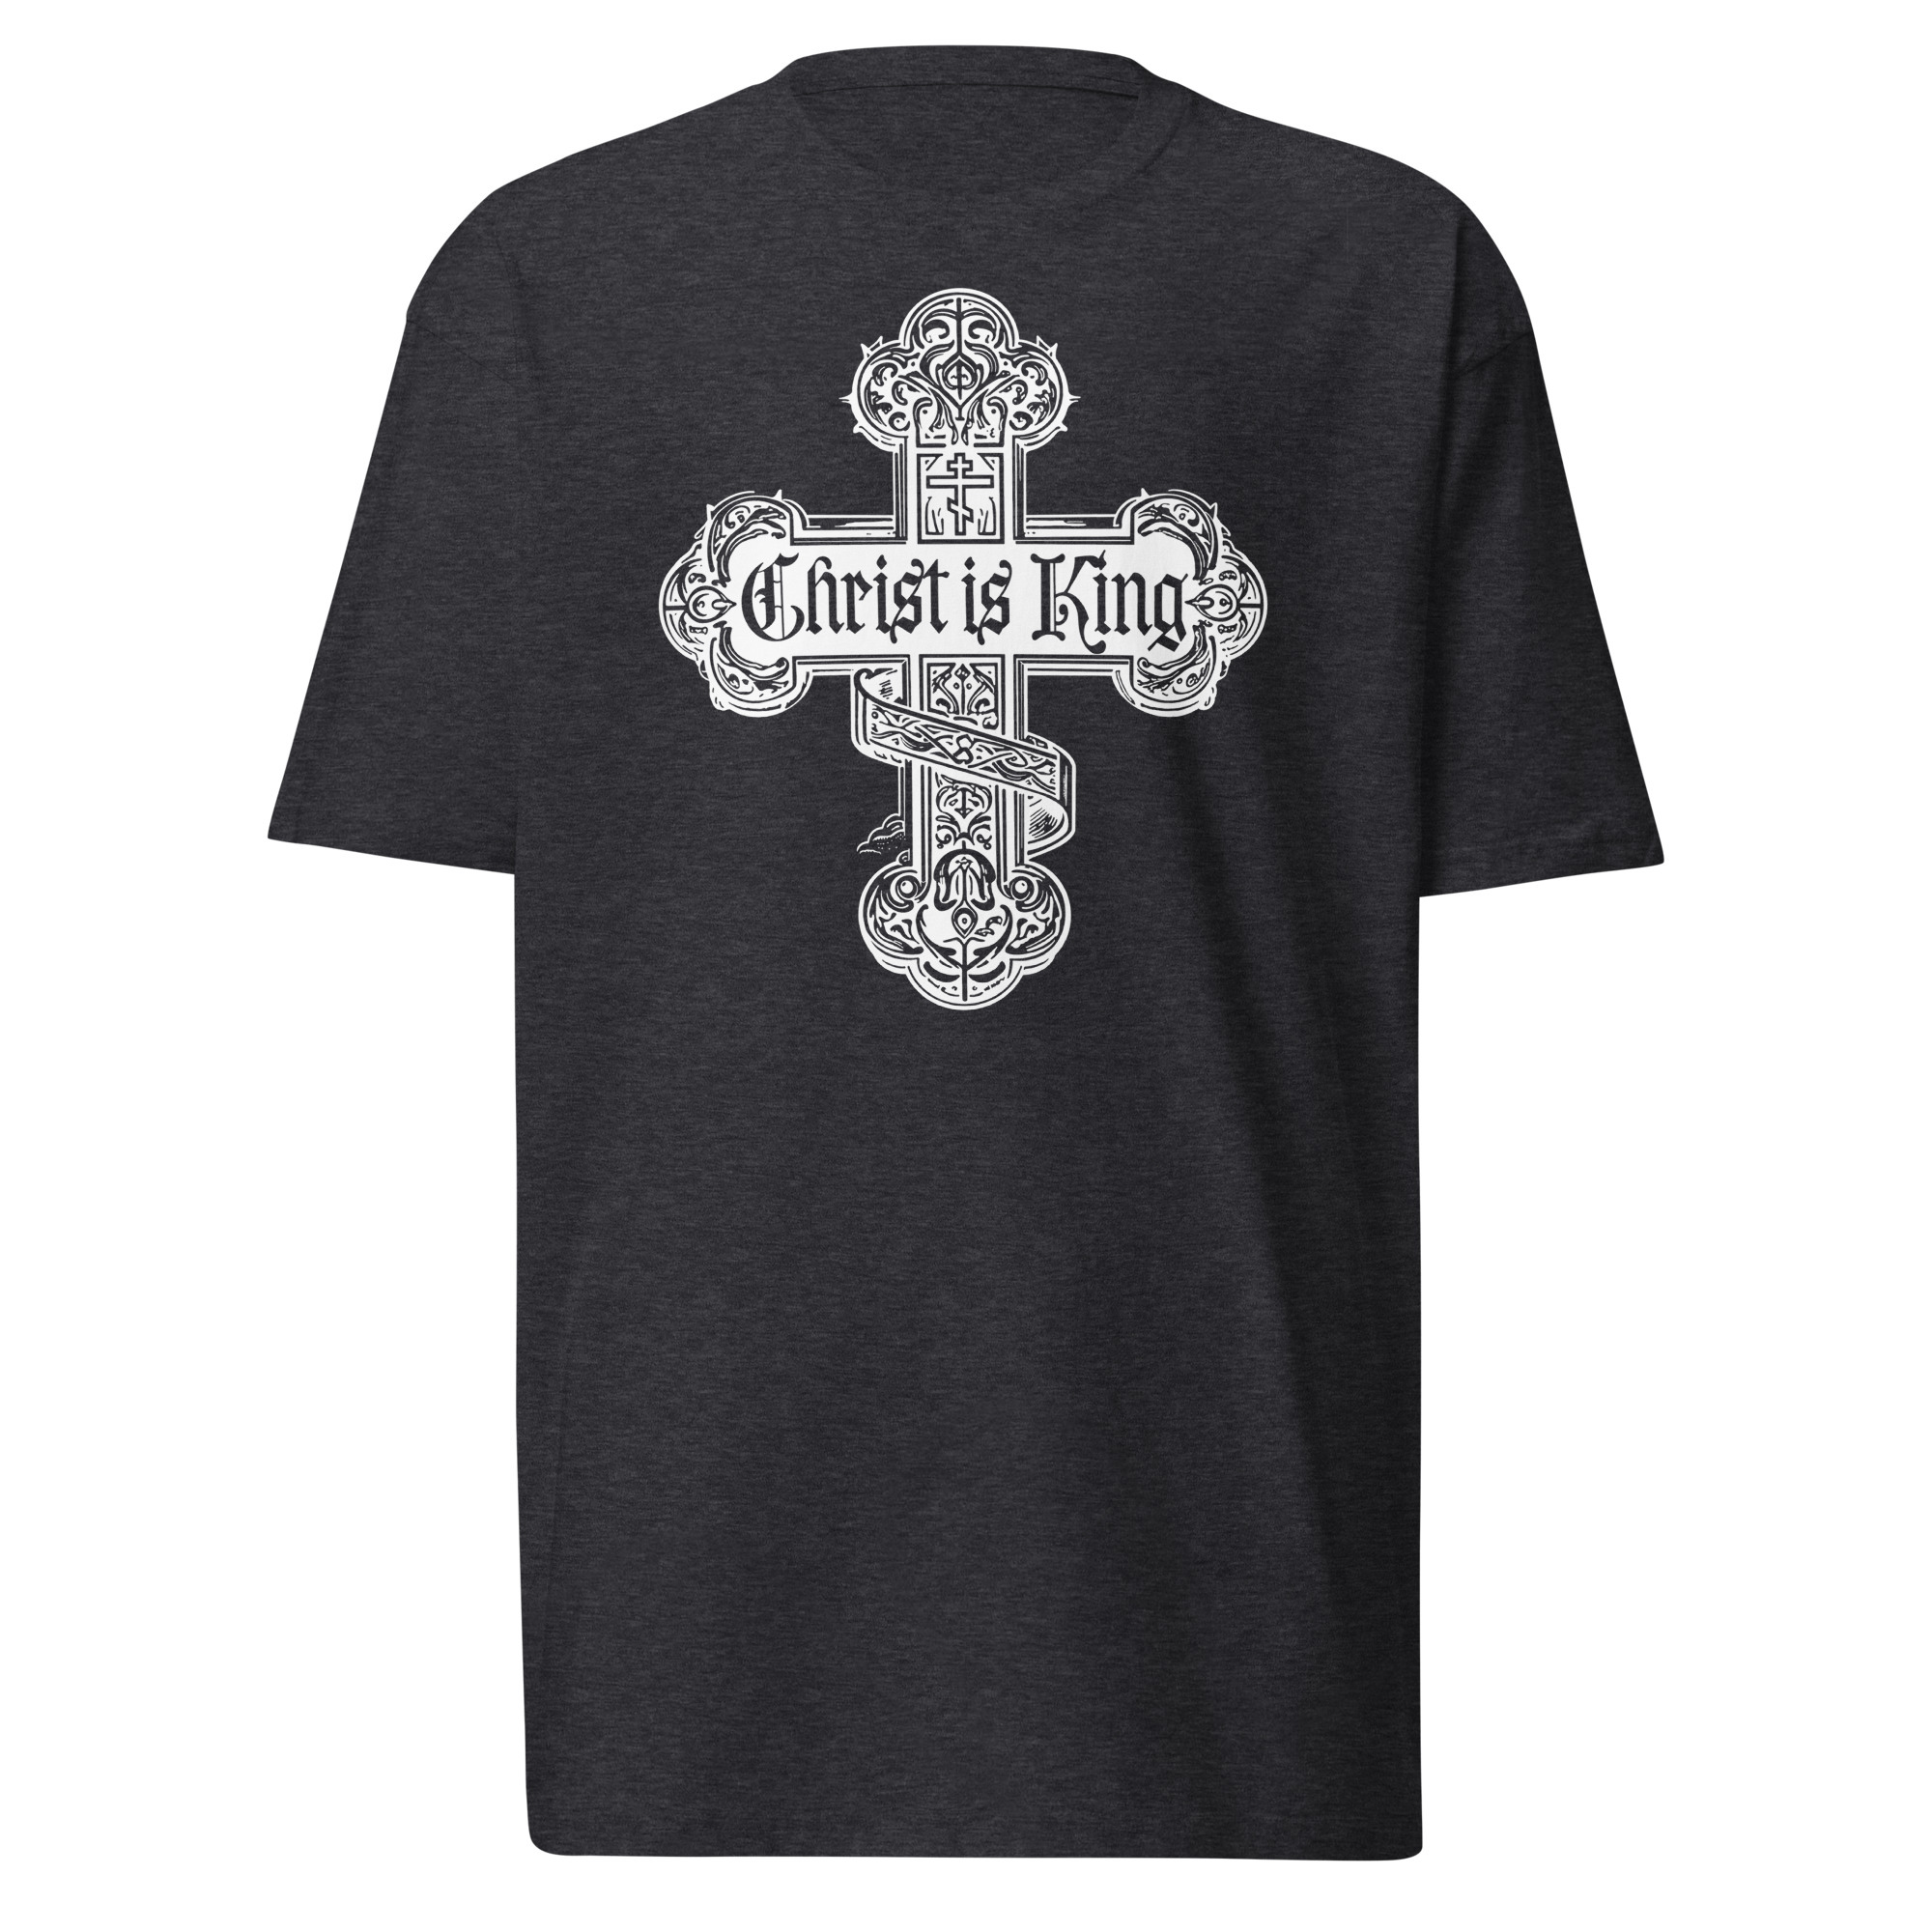 Christ is King Cross T-Shirt - Charcoal Heather / S